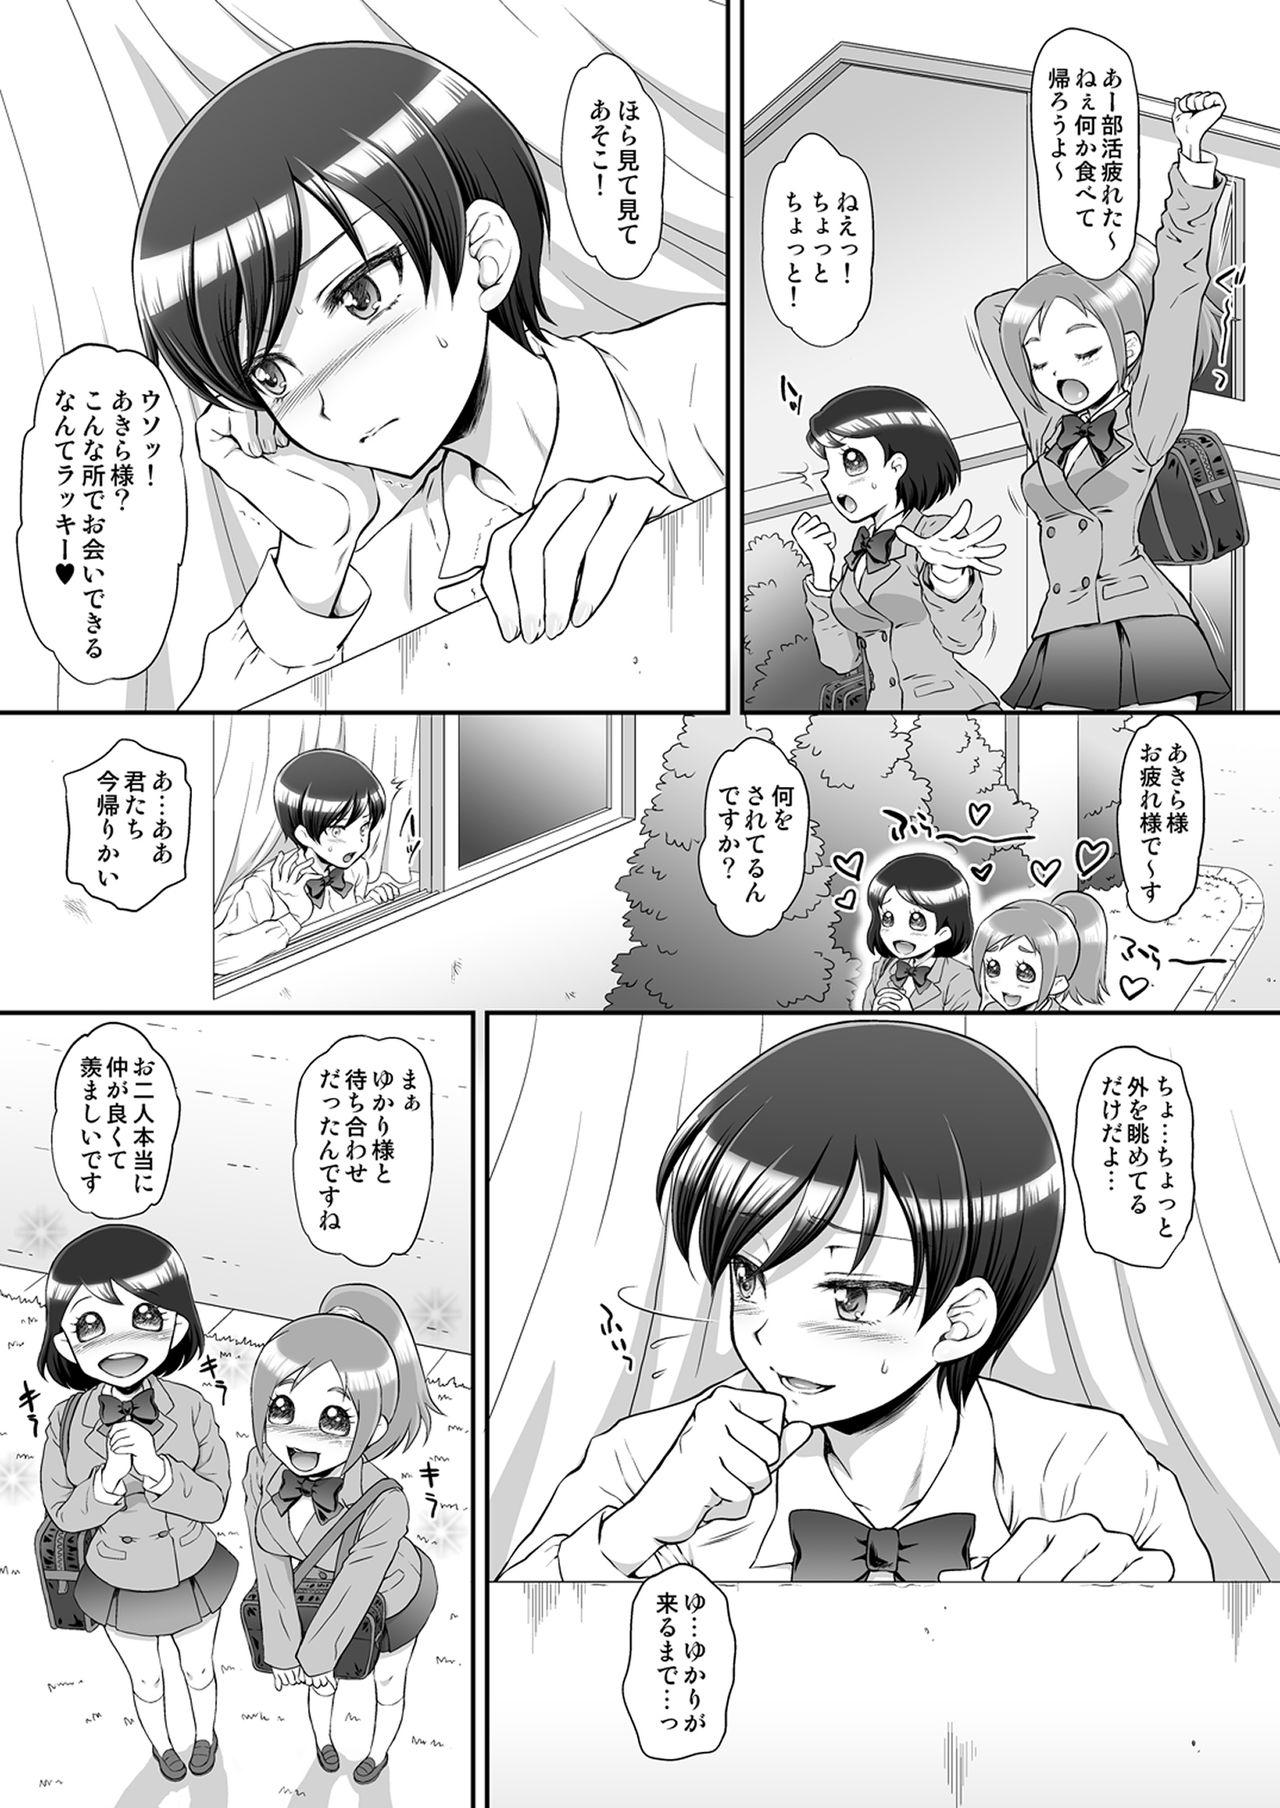 Thief Omakebon Collection 2 - Pretty cure Dress - Page 3